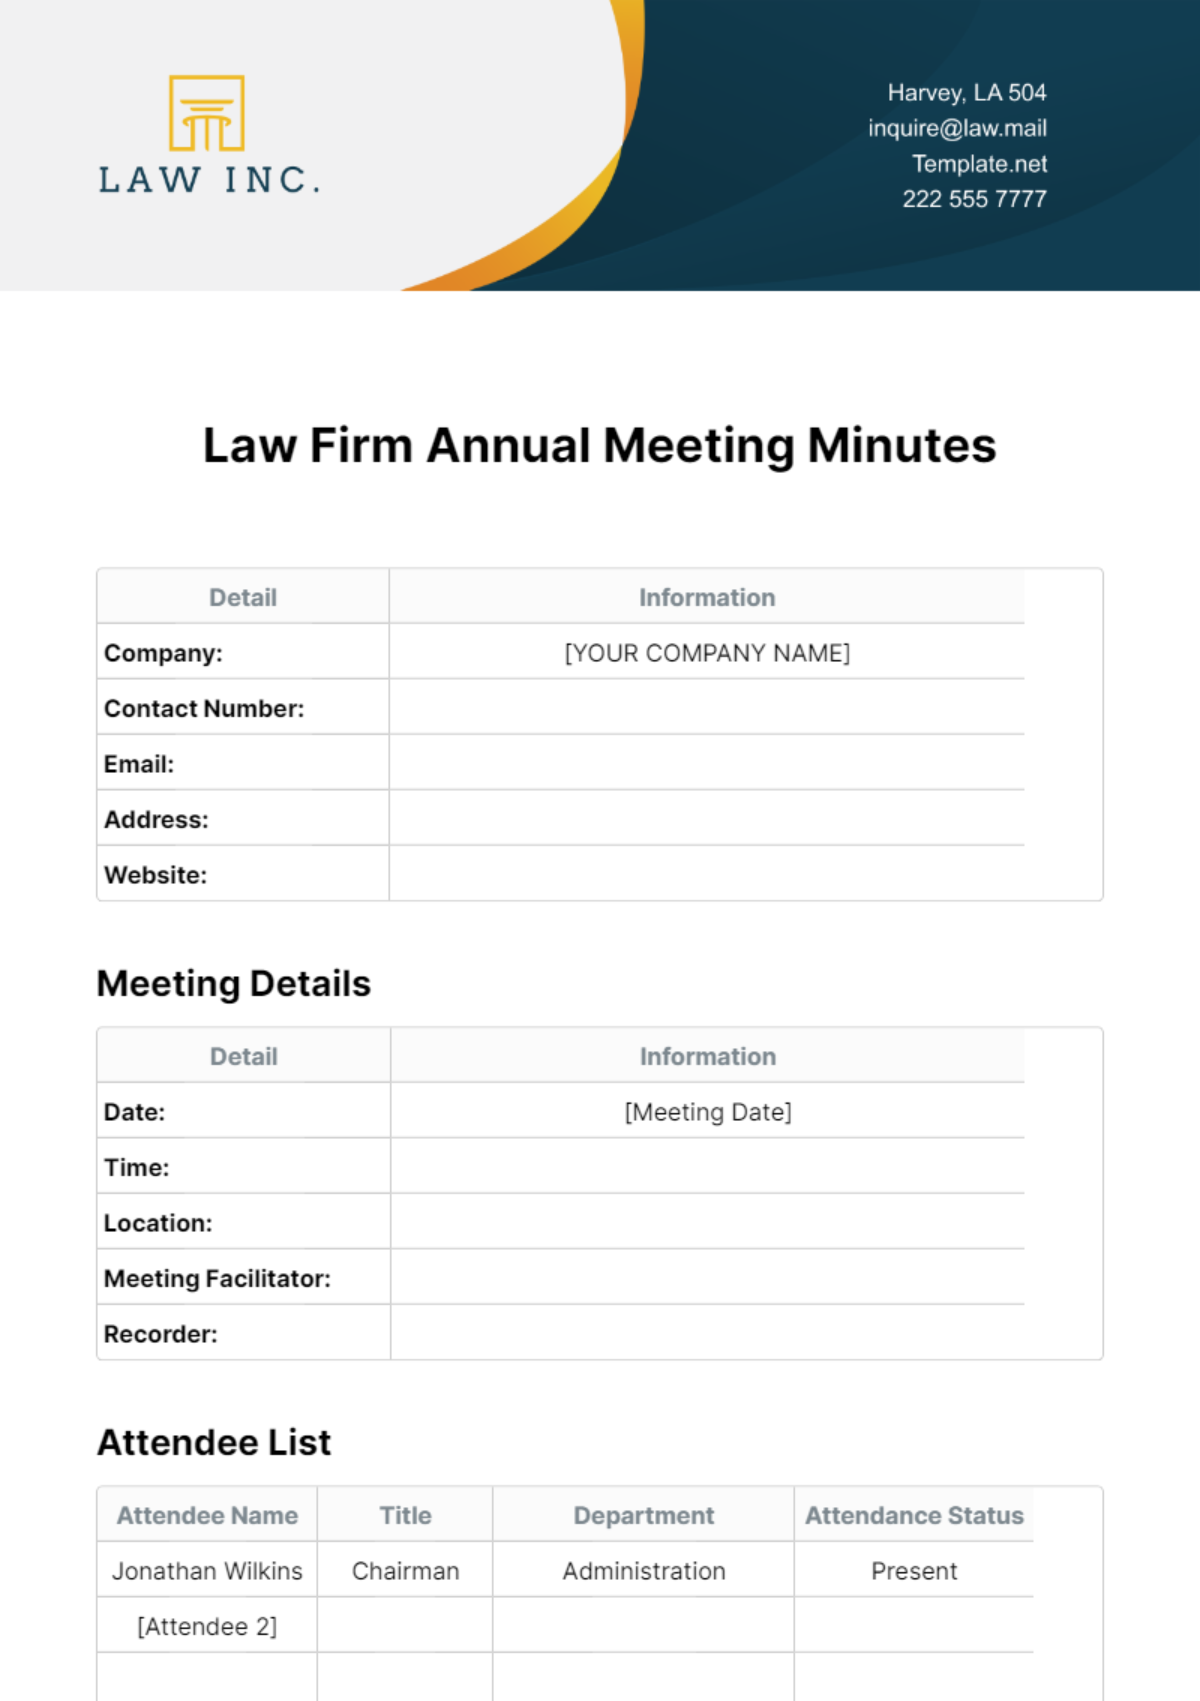 Law Firm Annual Meeting Minutes Template